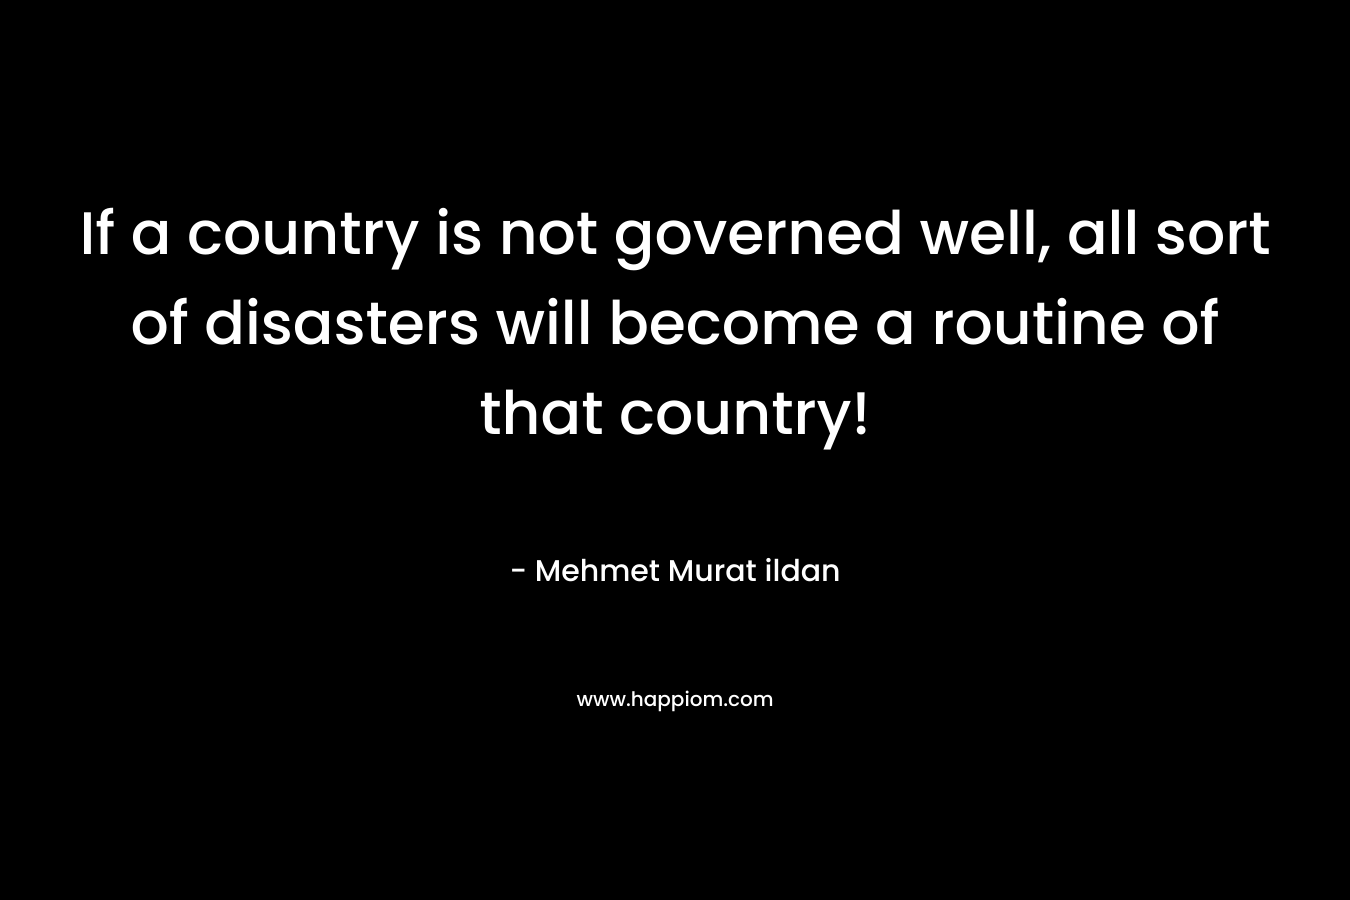 If a country is not governed well, all sort of disasters will become a routine of that country!